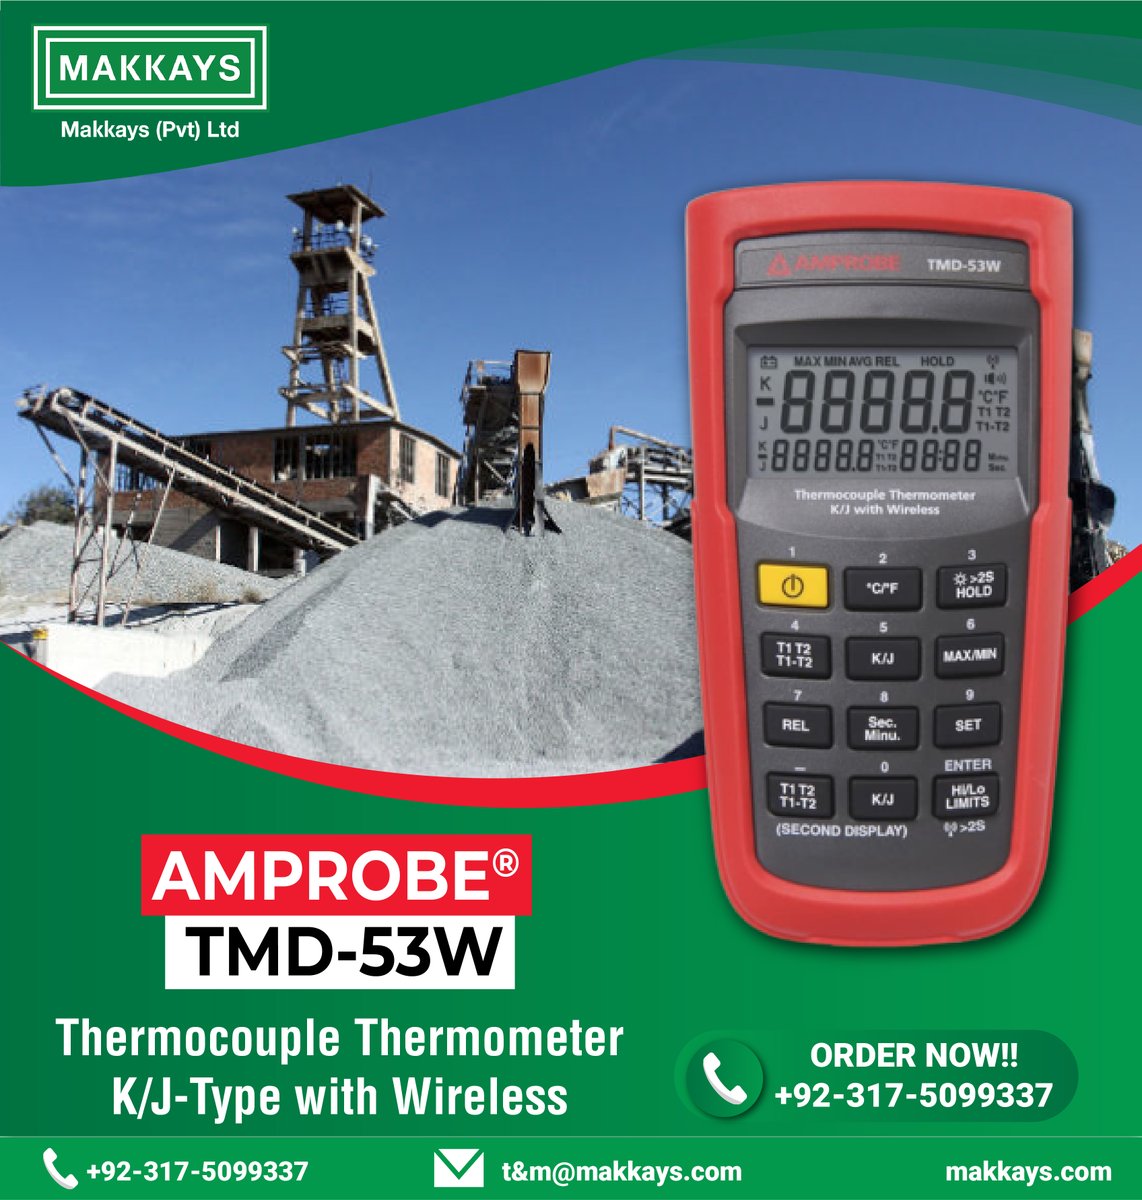 The #Amprobe TMD-53W Thermocouple Thermometer with wireless download capability is a perfect choice for HVAC/R technicians and electricians, or for demanding applications that require a high degree of accuracy.
#electricalequipment #electricalequipment #technicalservices #makkays